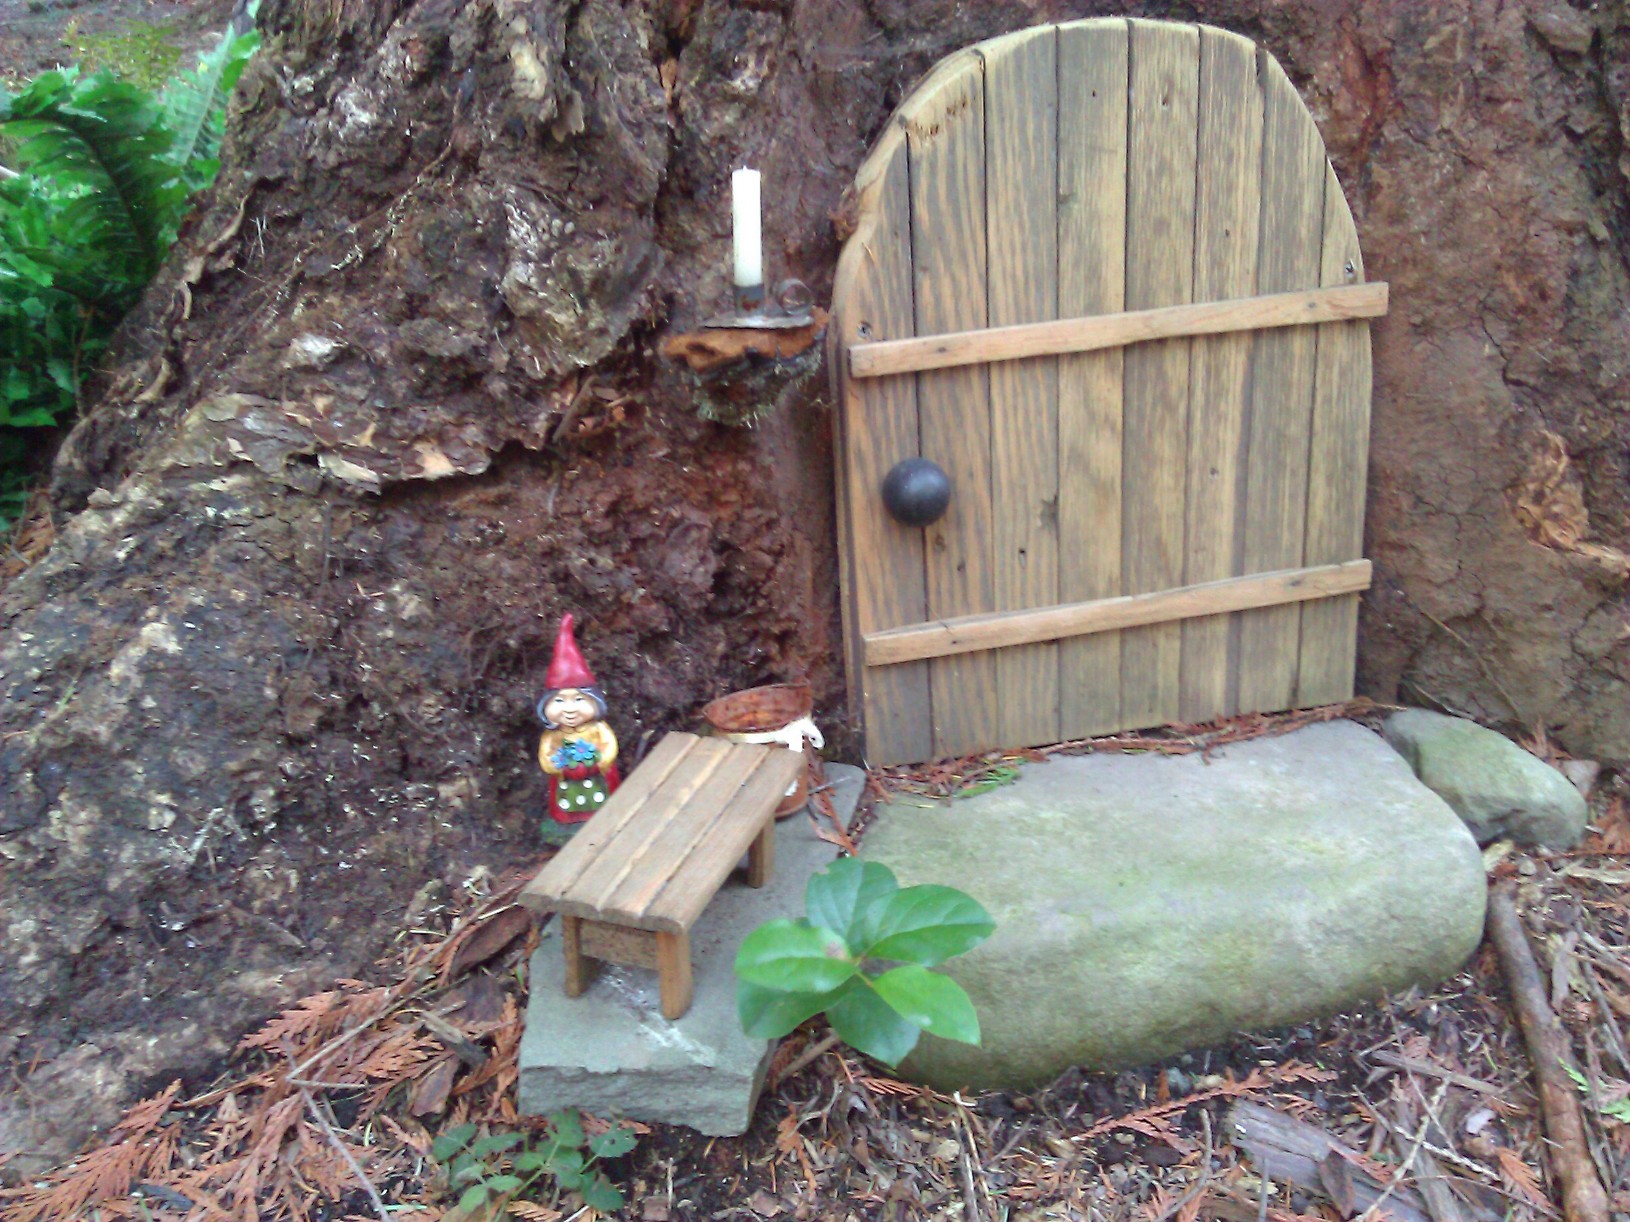 Closer inspection revealed that the fairy house was already inhabited 